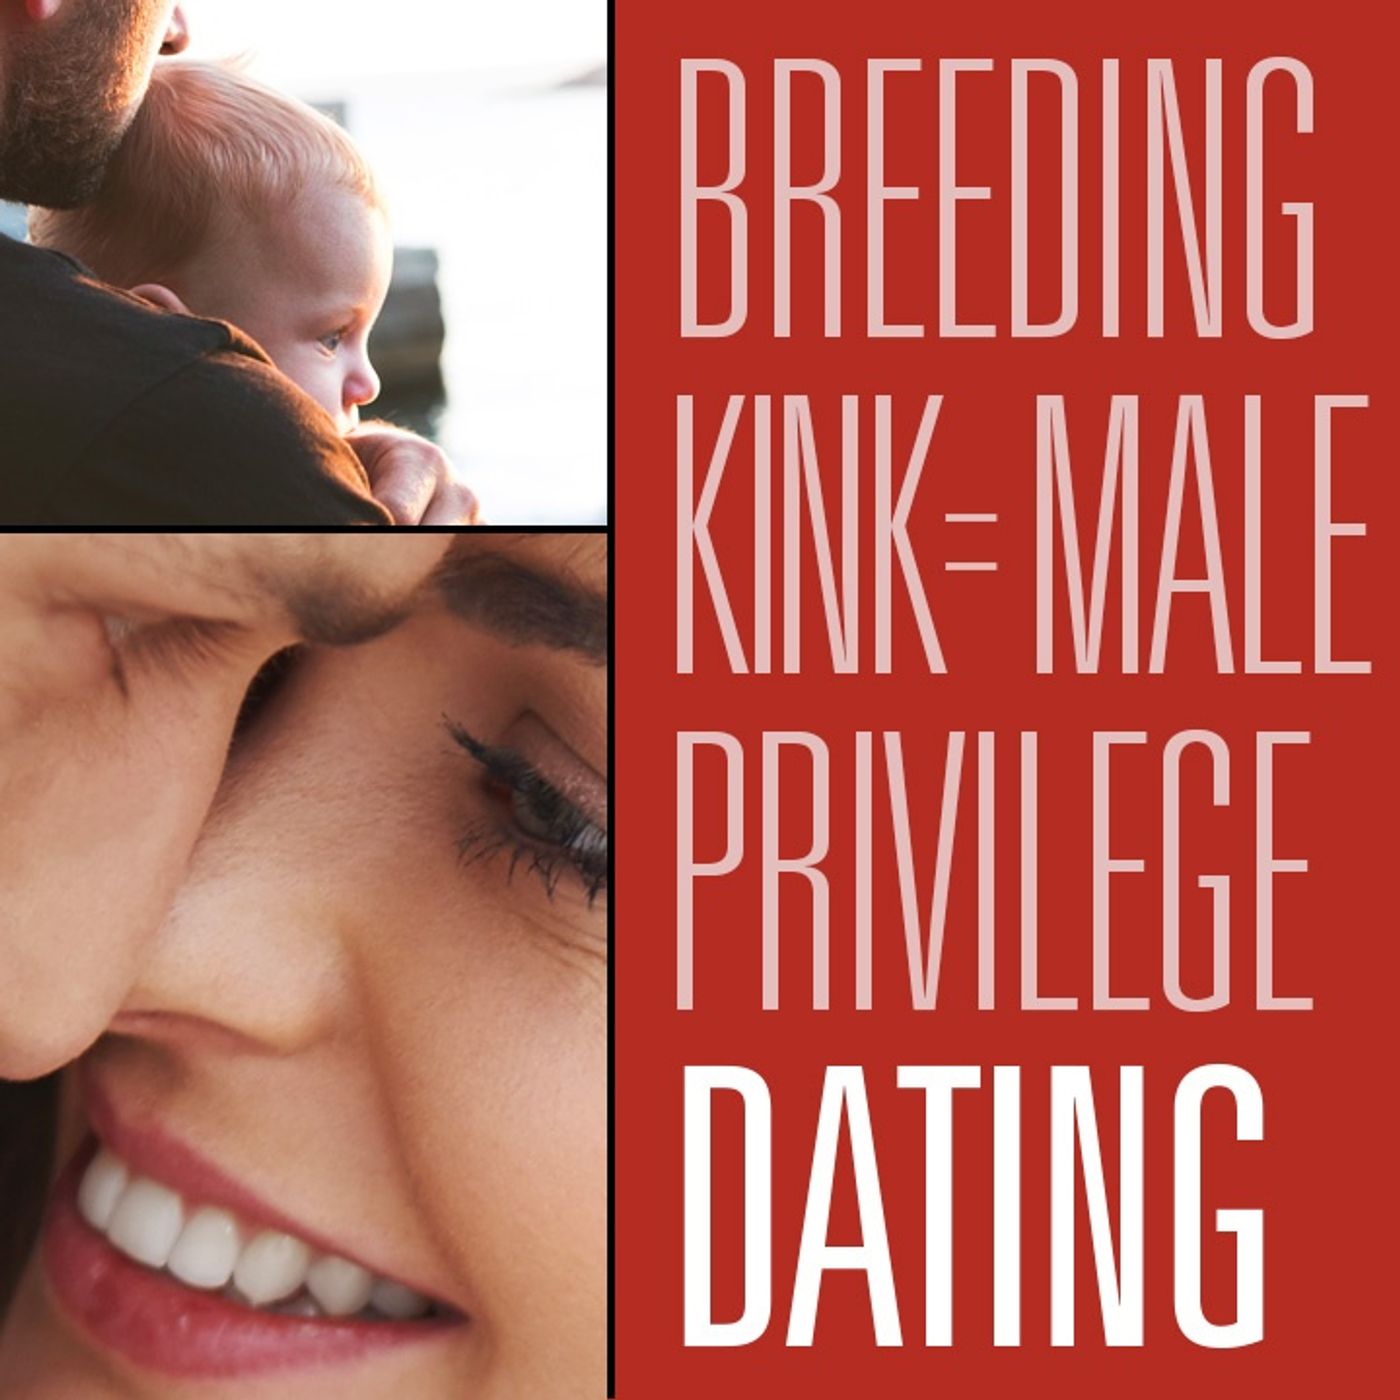 This is how the Breeding Kink is Patriarchal oppression! | The Dating Show